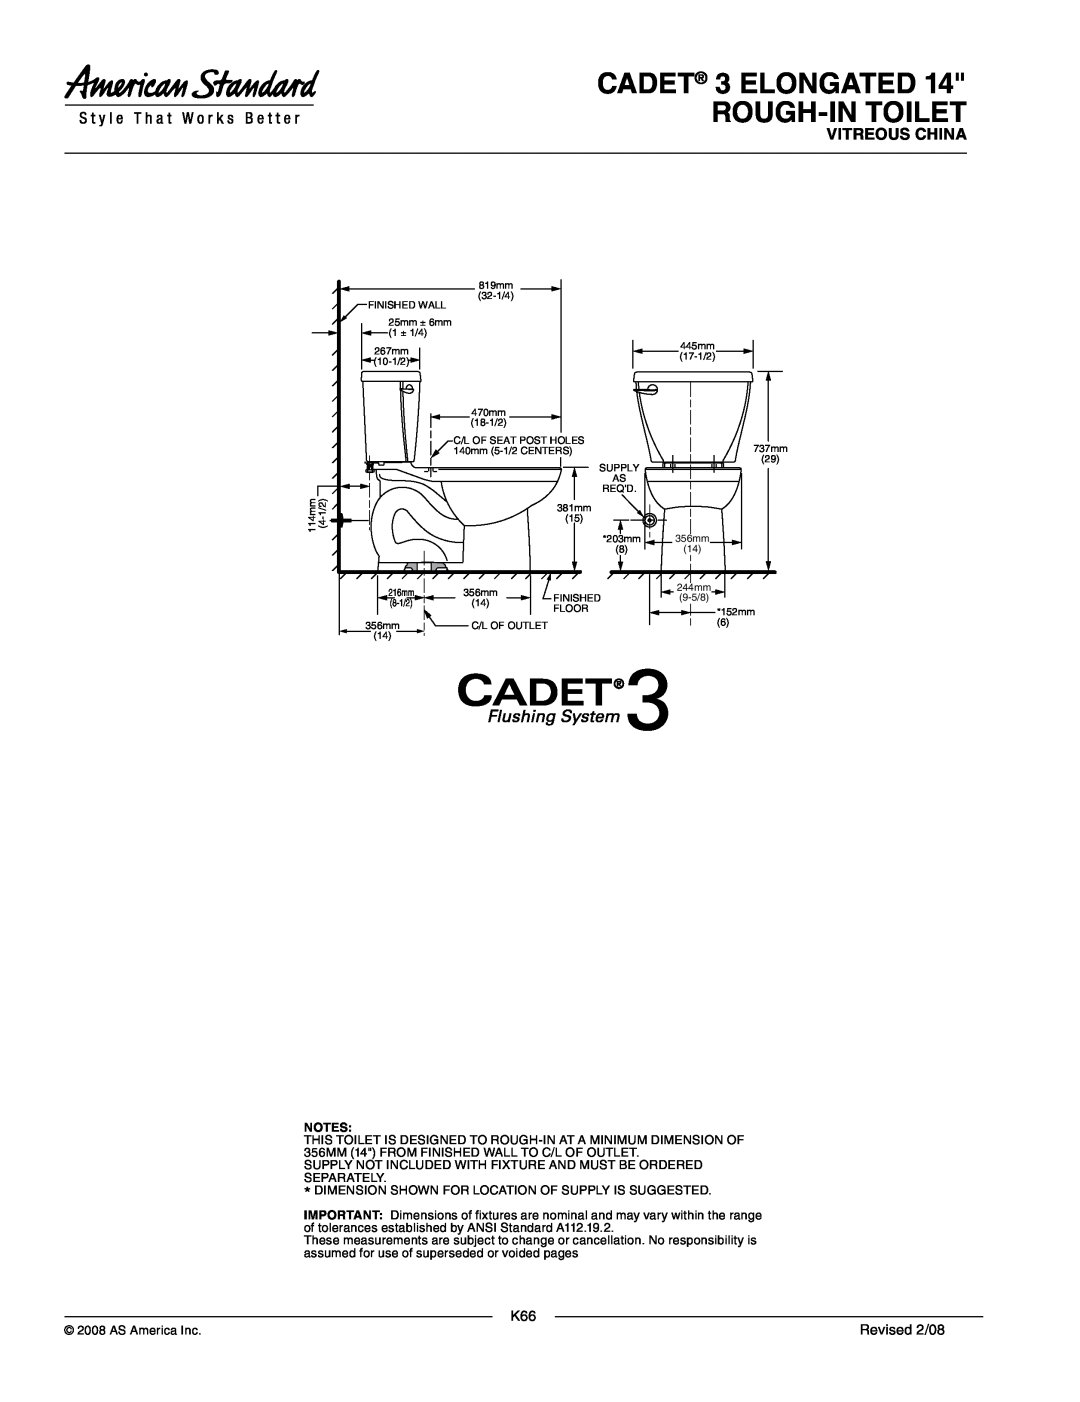 American Standard 4027.016, 4027.600, 4027.900, 4027.800 CADET 3 ELONGATED ROUGH-INTOILET, Vitreous China, Revised 2/08 